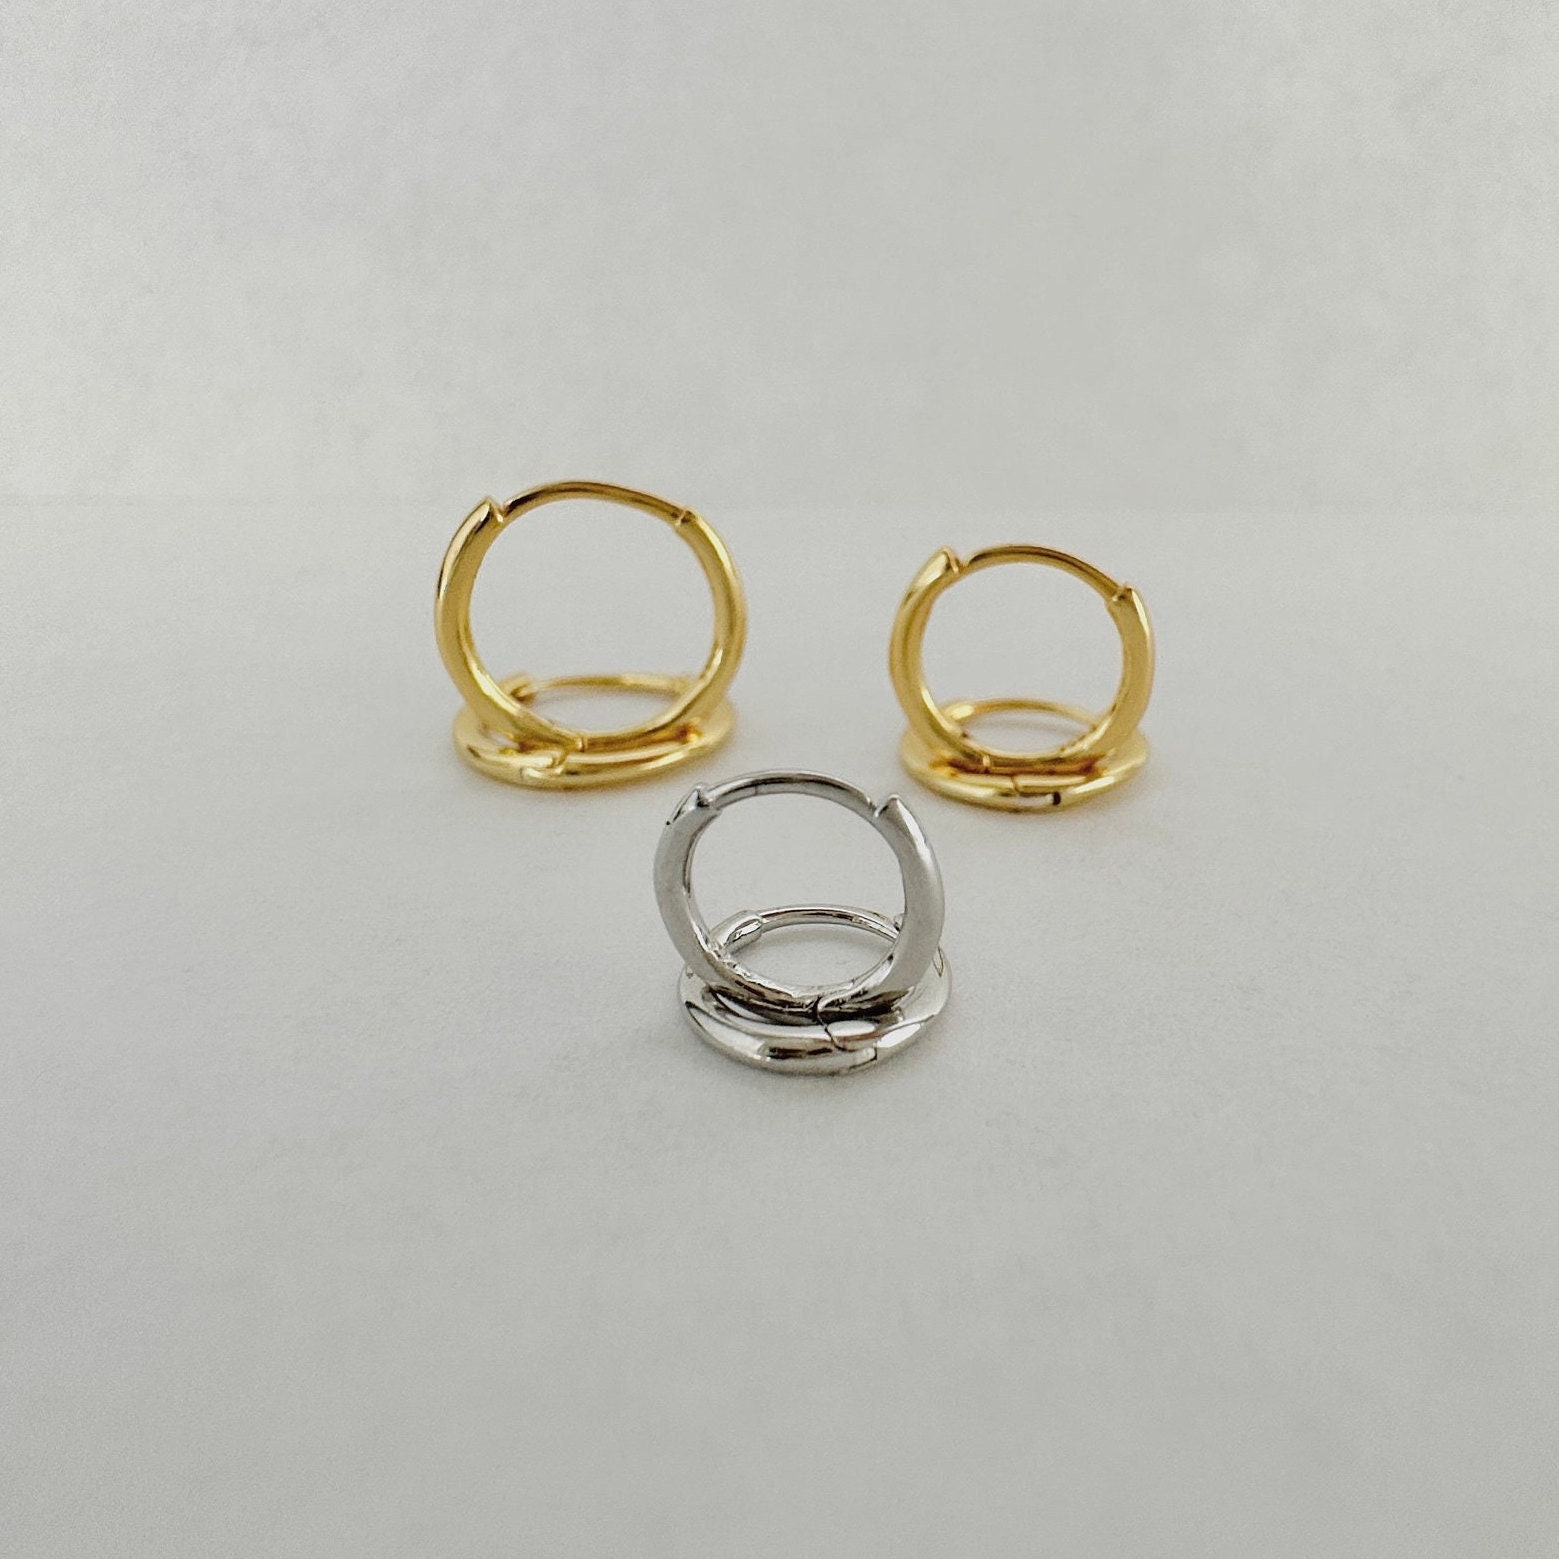 LIHELEI 3pairs 14K Gold Plated Huggie Earrings for India | Ubuy